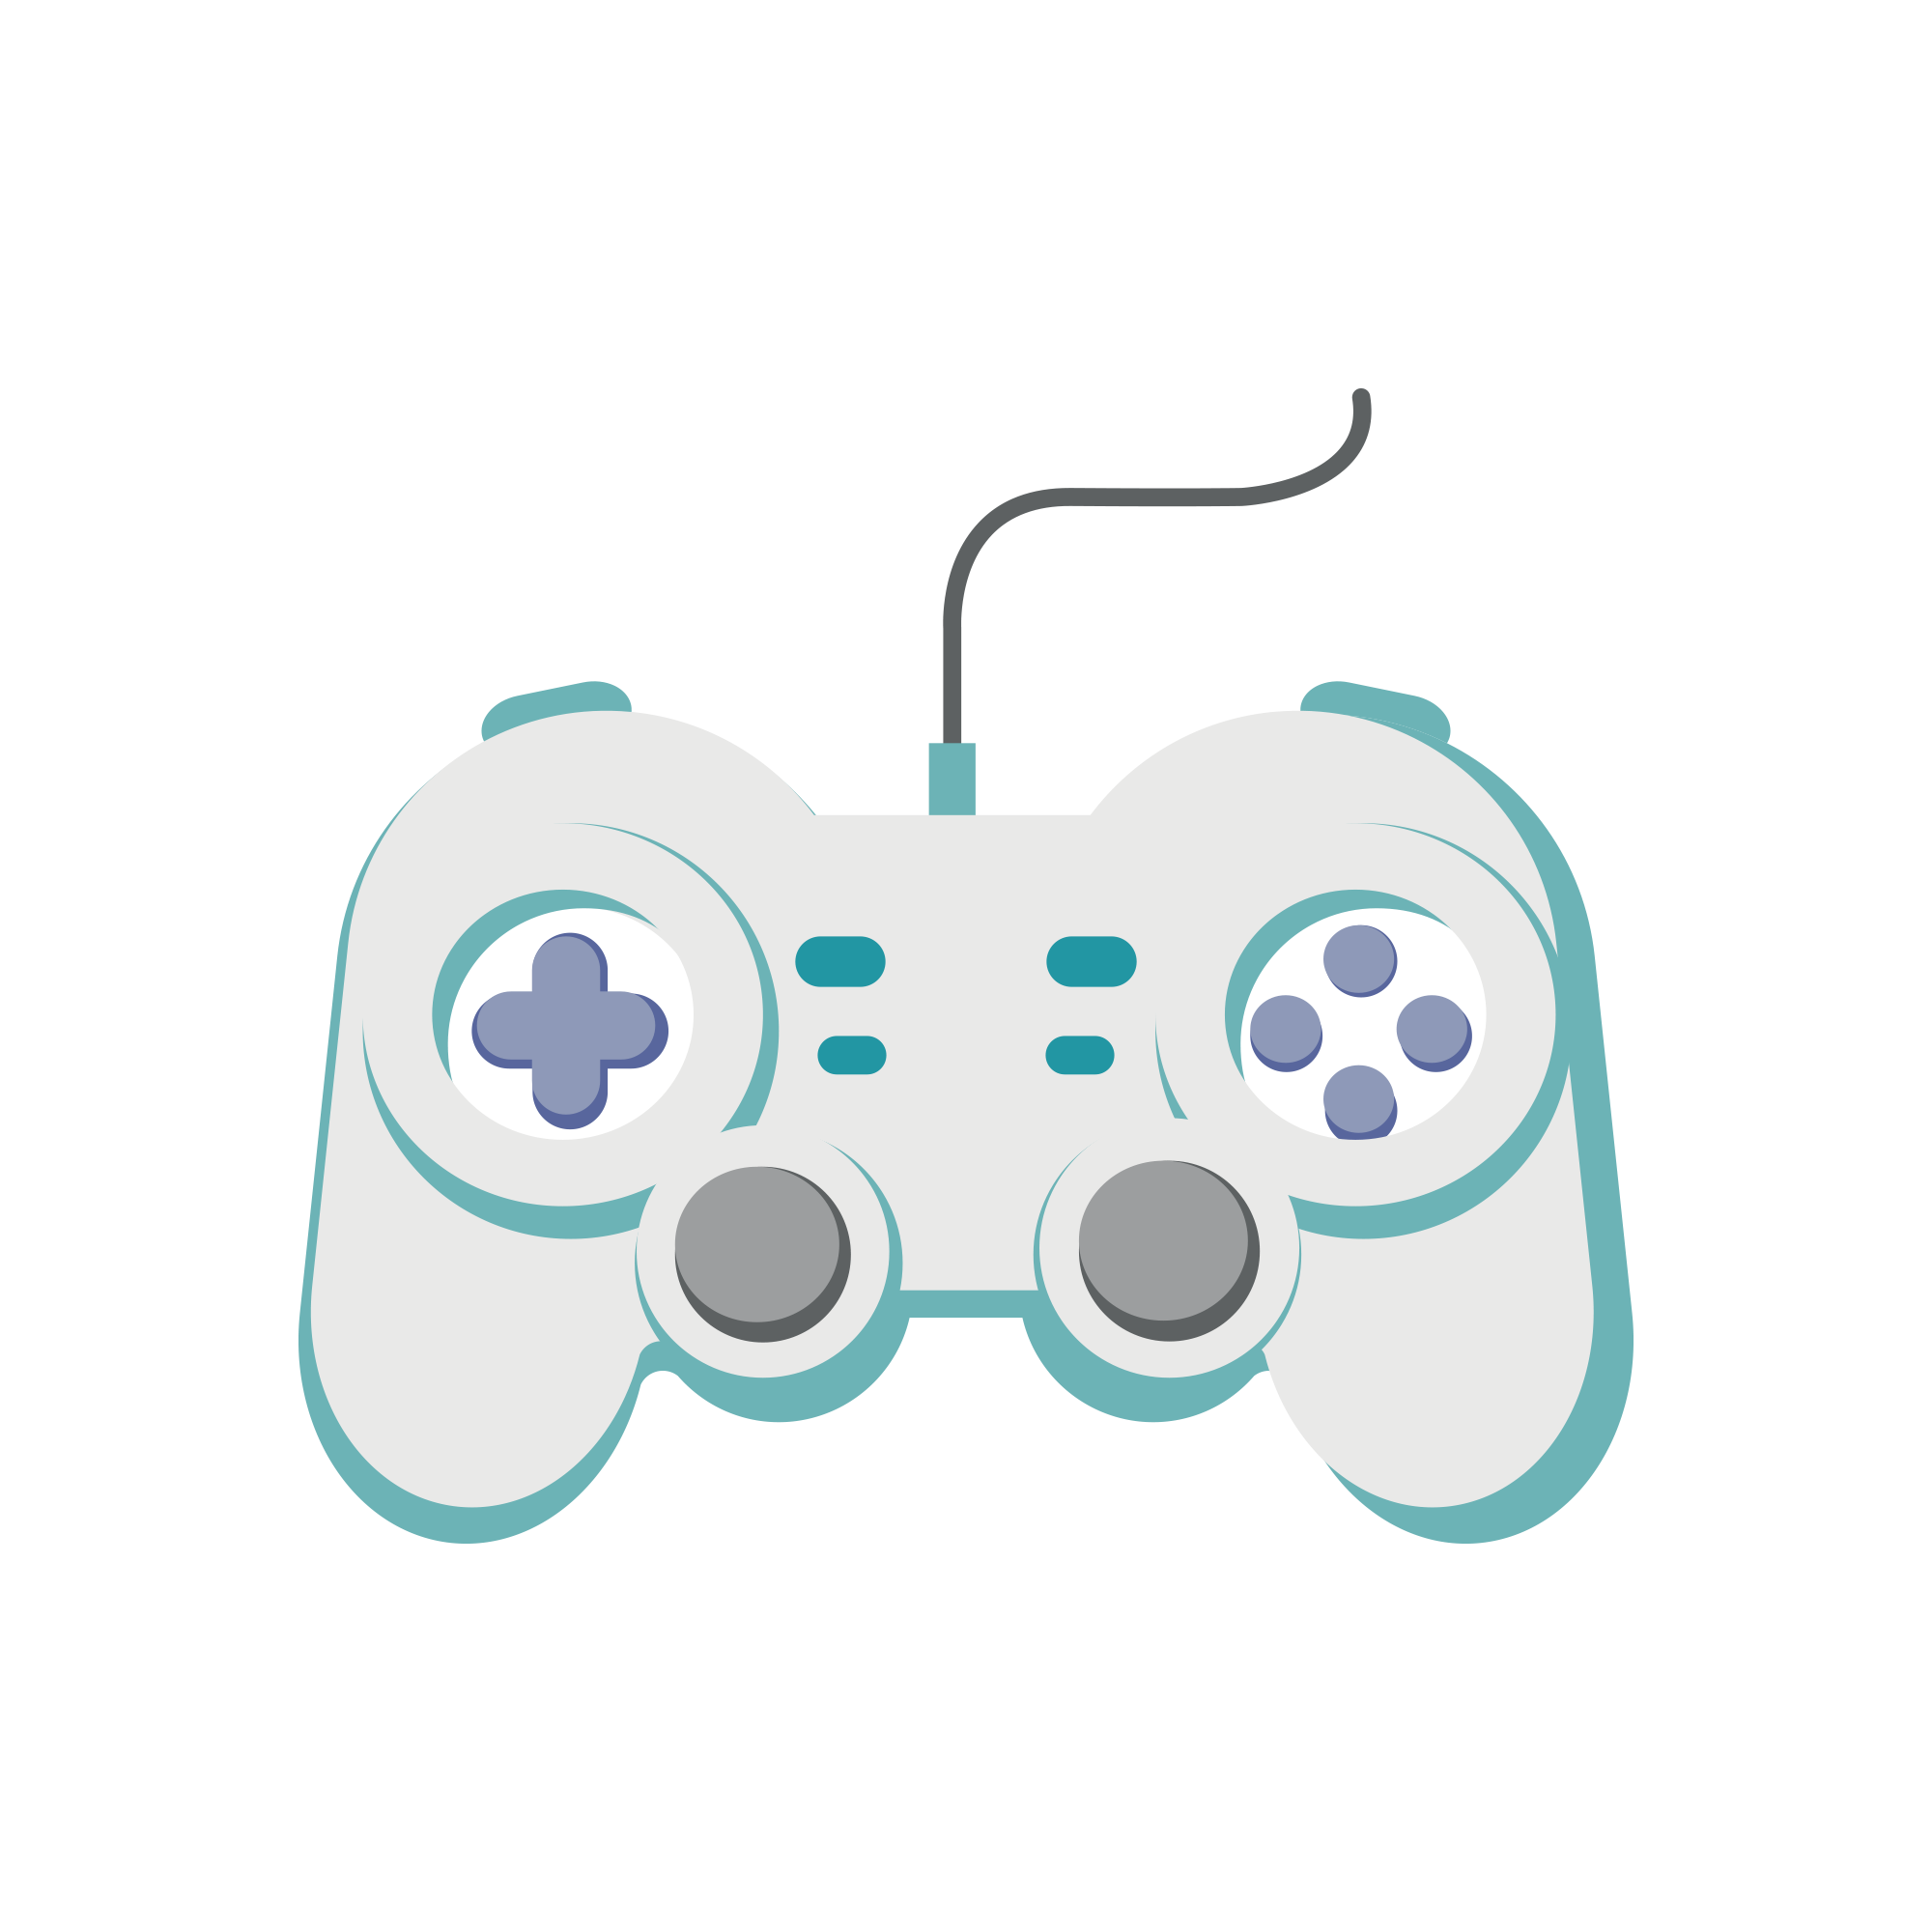 Blue Product Gamepad Controllers Game Joystick PNG Image